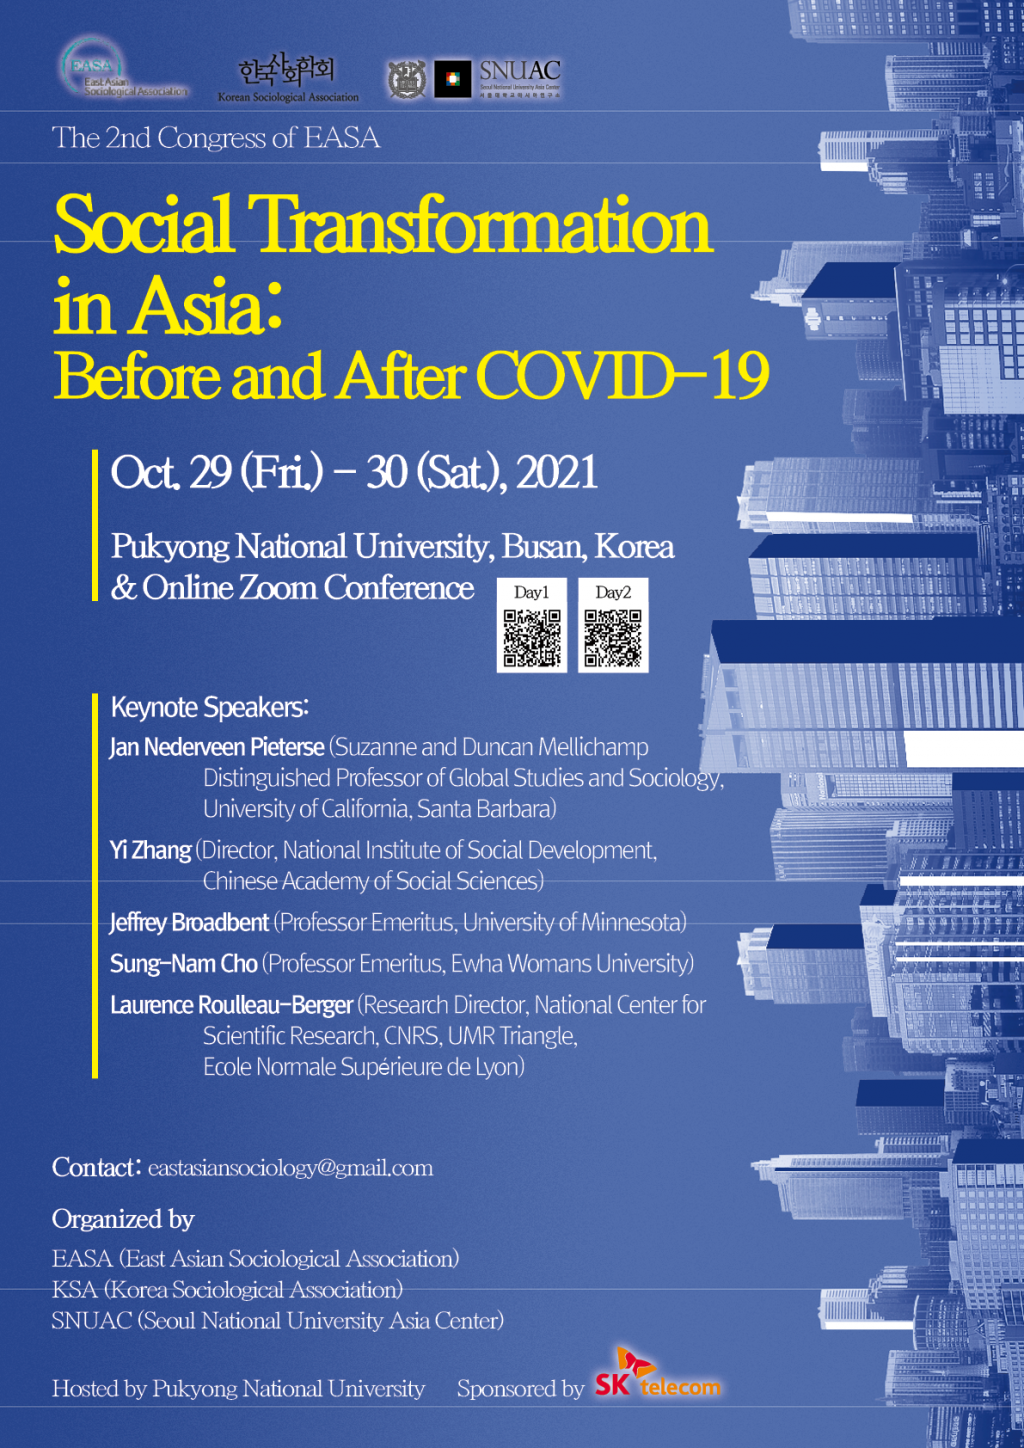 Social Transformation in Asia: Before and After COVID-19